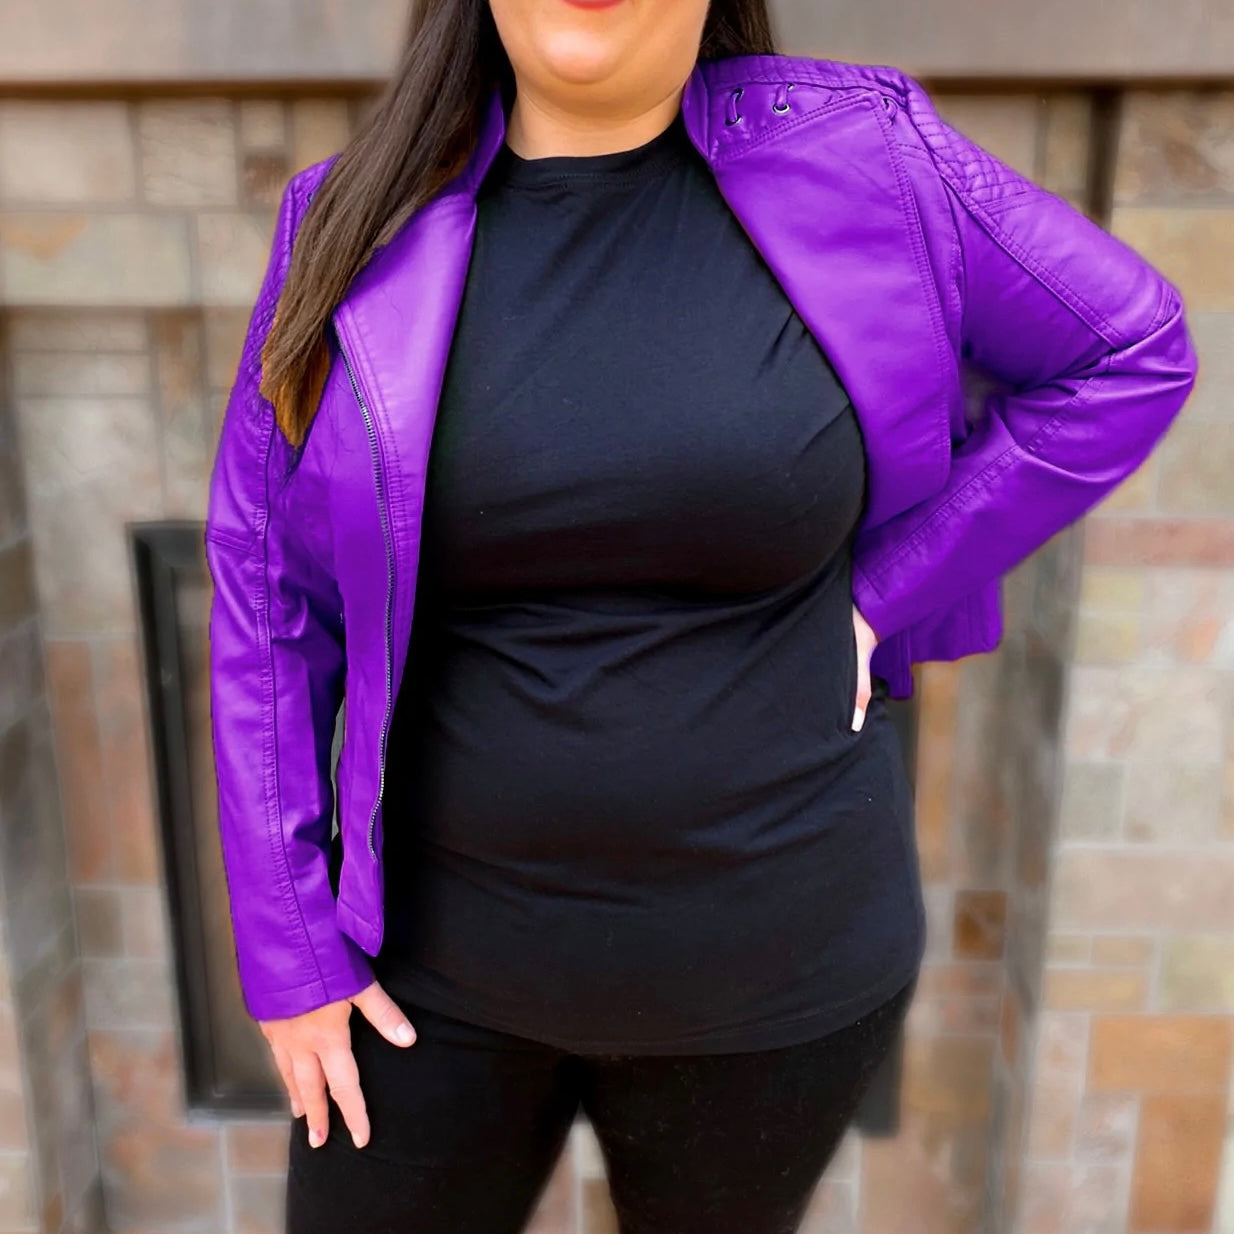 Vegan Leather. Quilted arm detail with lace up shoulders. Moto style sleeves. Diagonal Zippers. womens leather moto jacket vegan leather jacket colored blazer bright purple neon